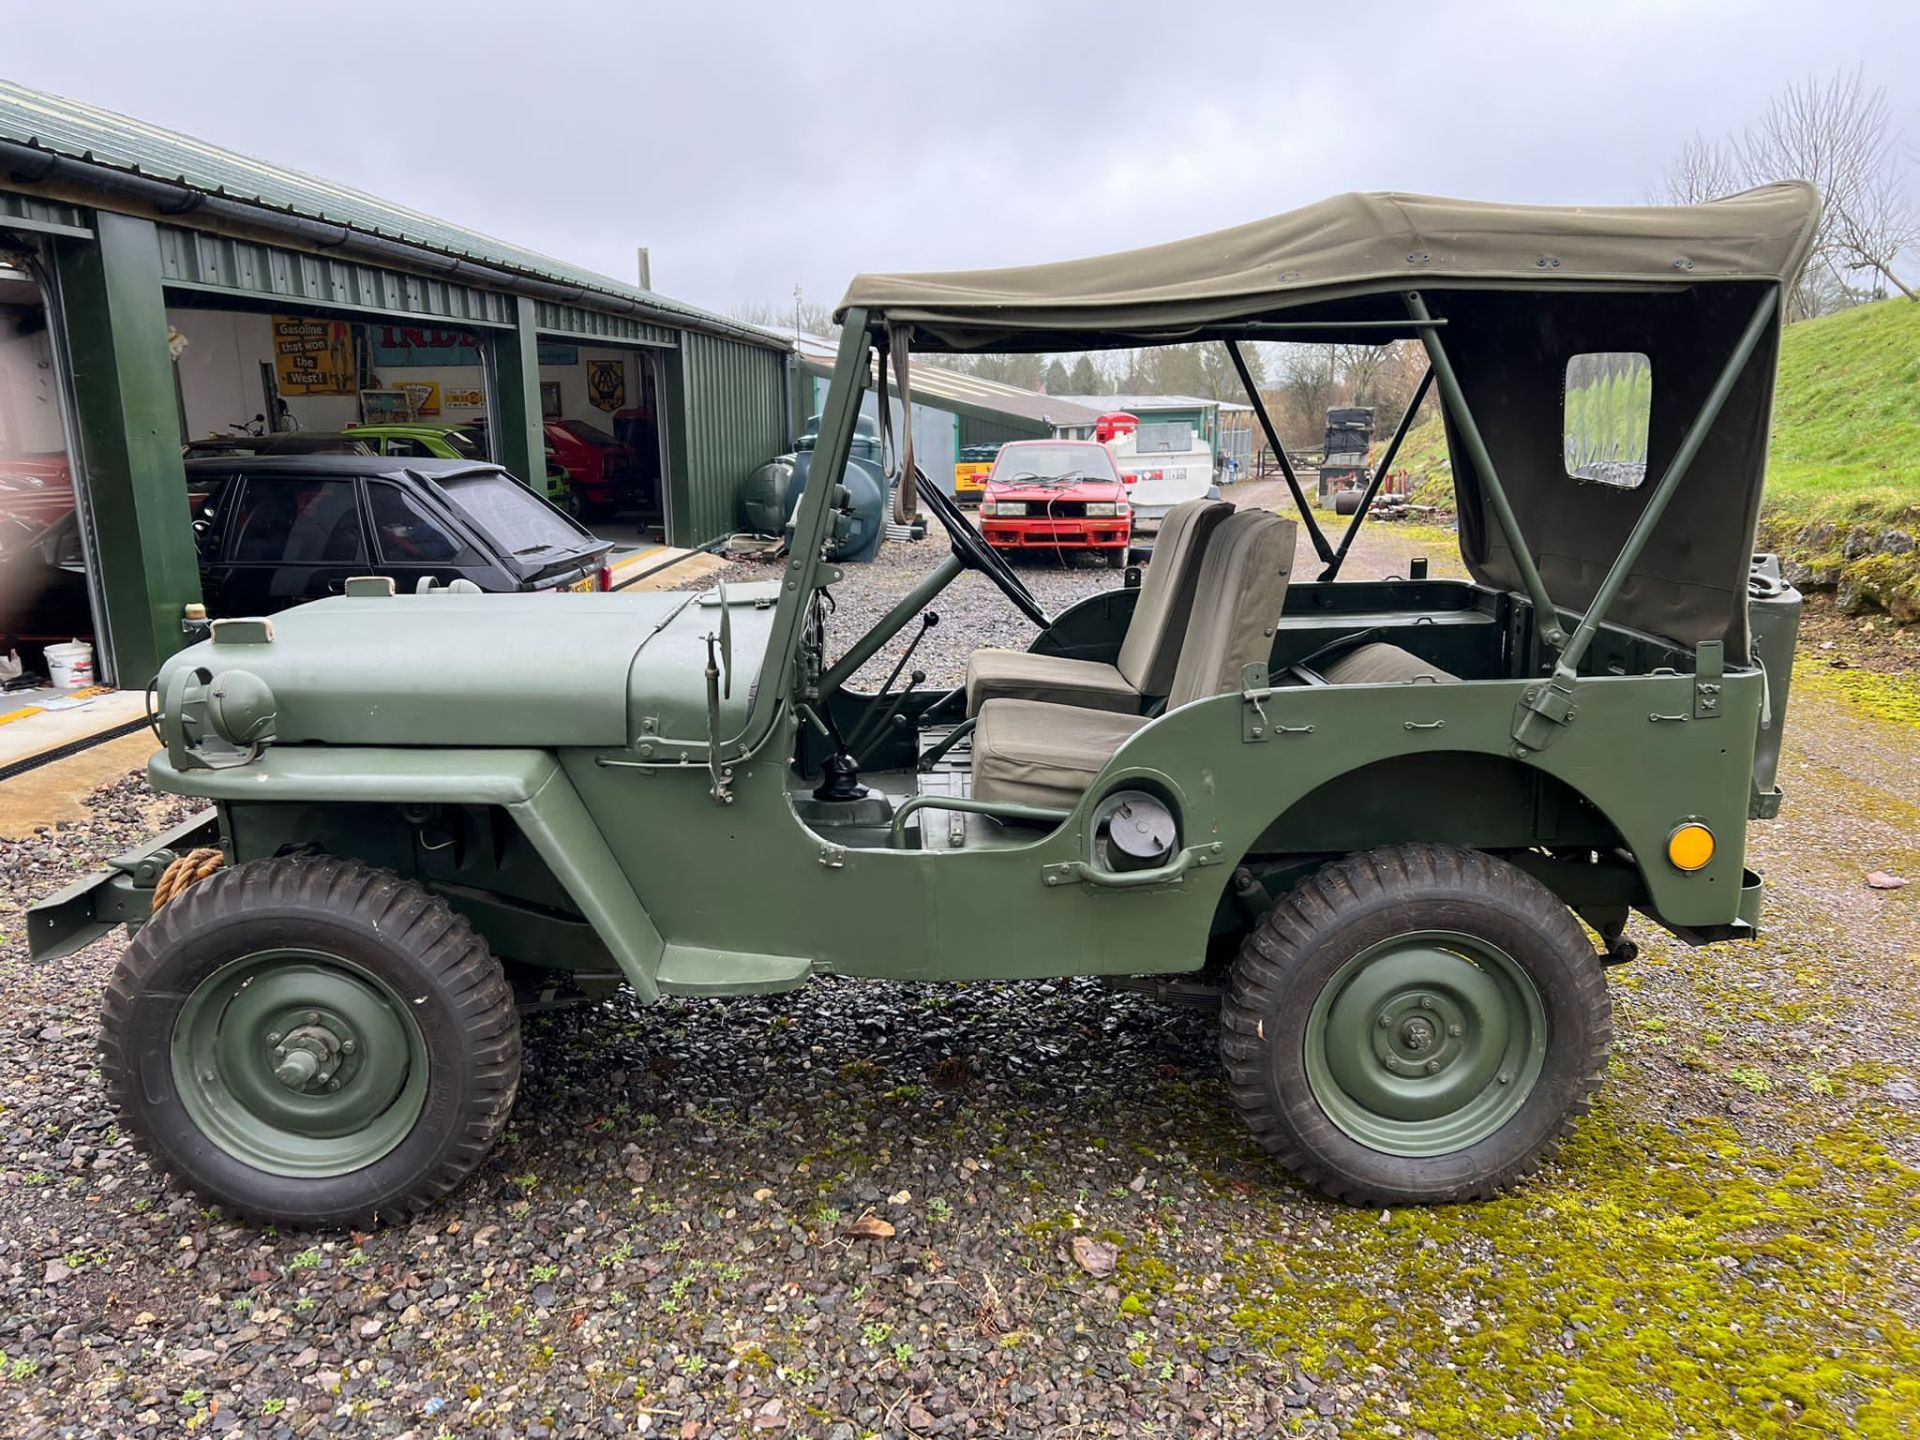 Willys Jeep Model M38 1945 - Image 4 of 13